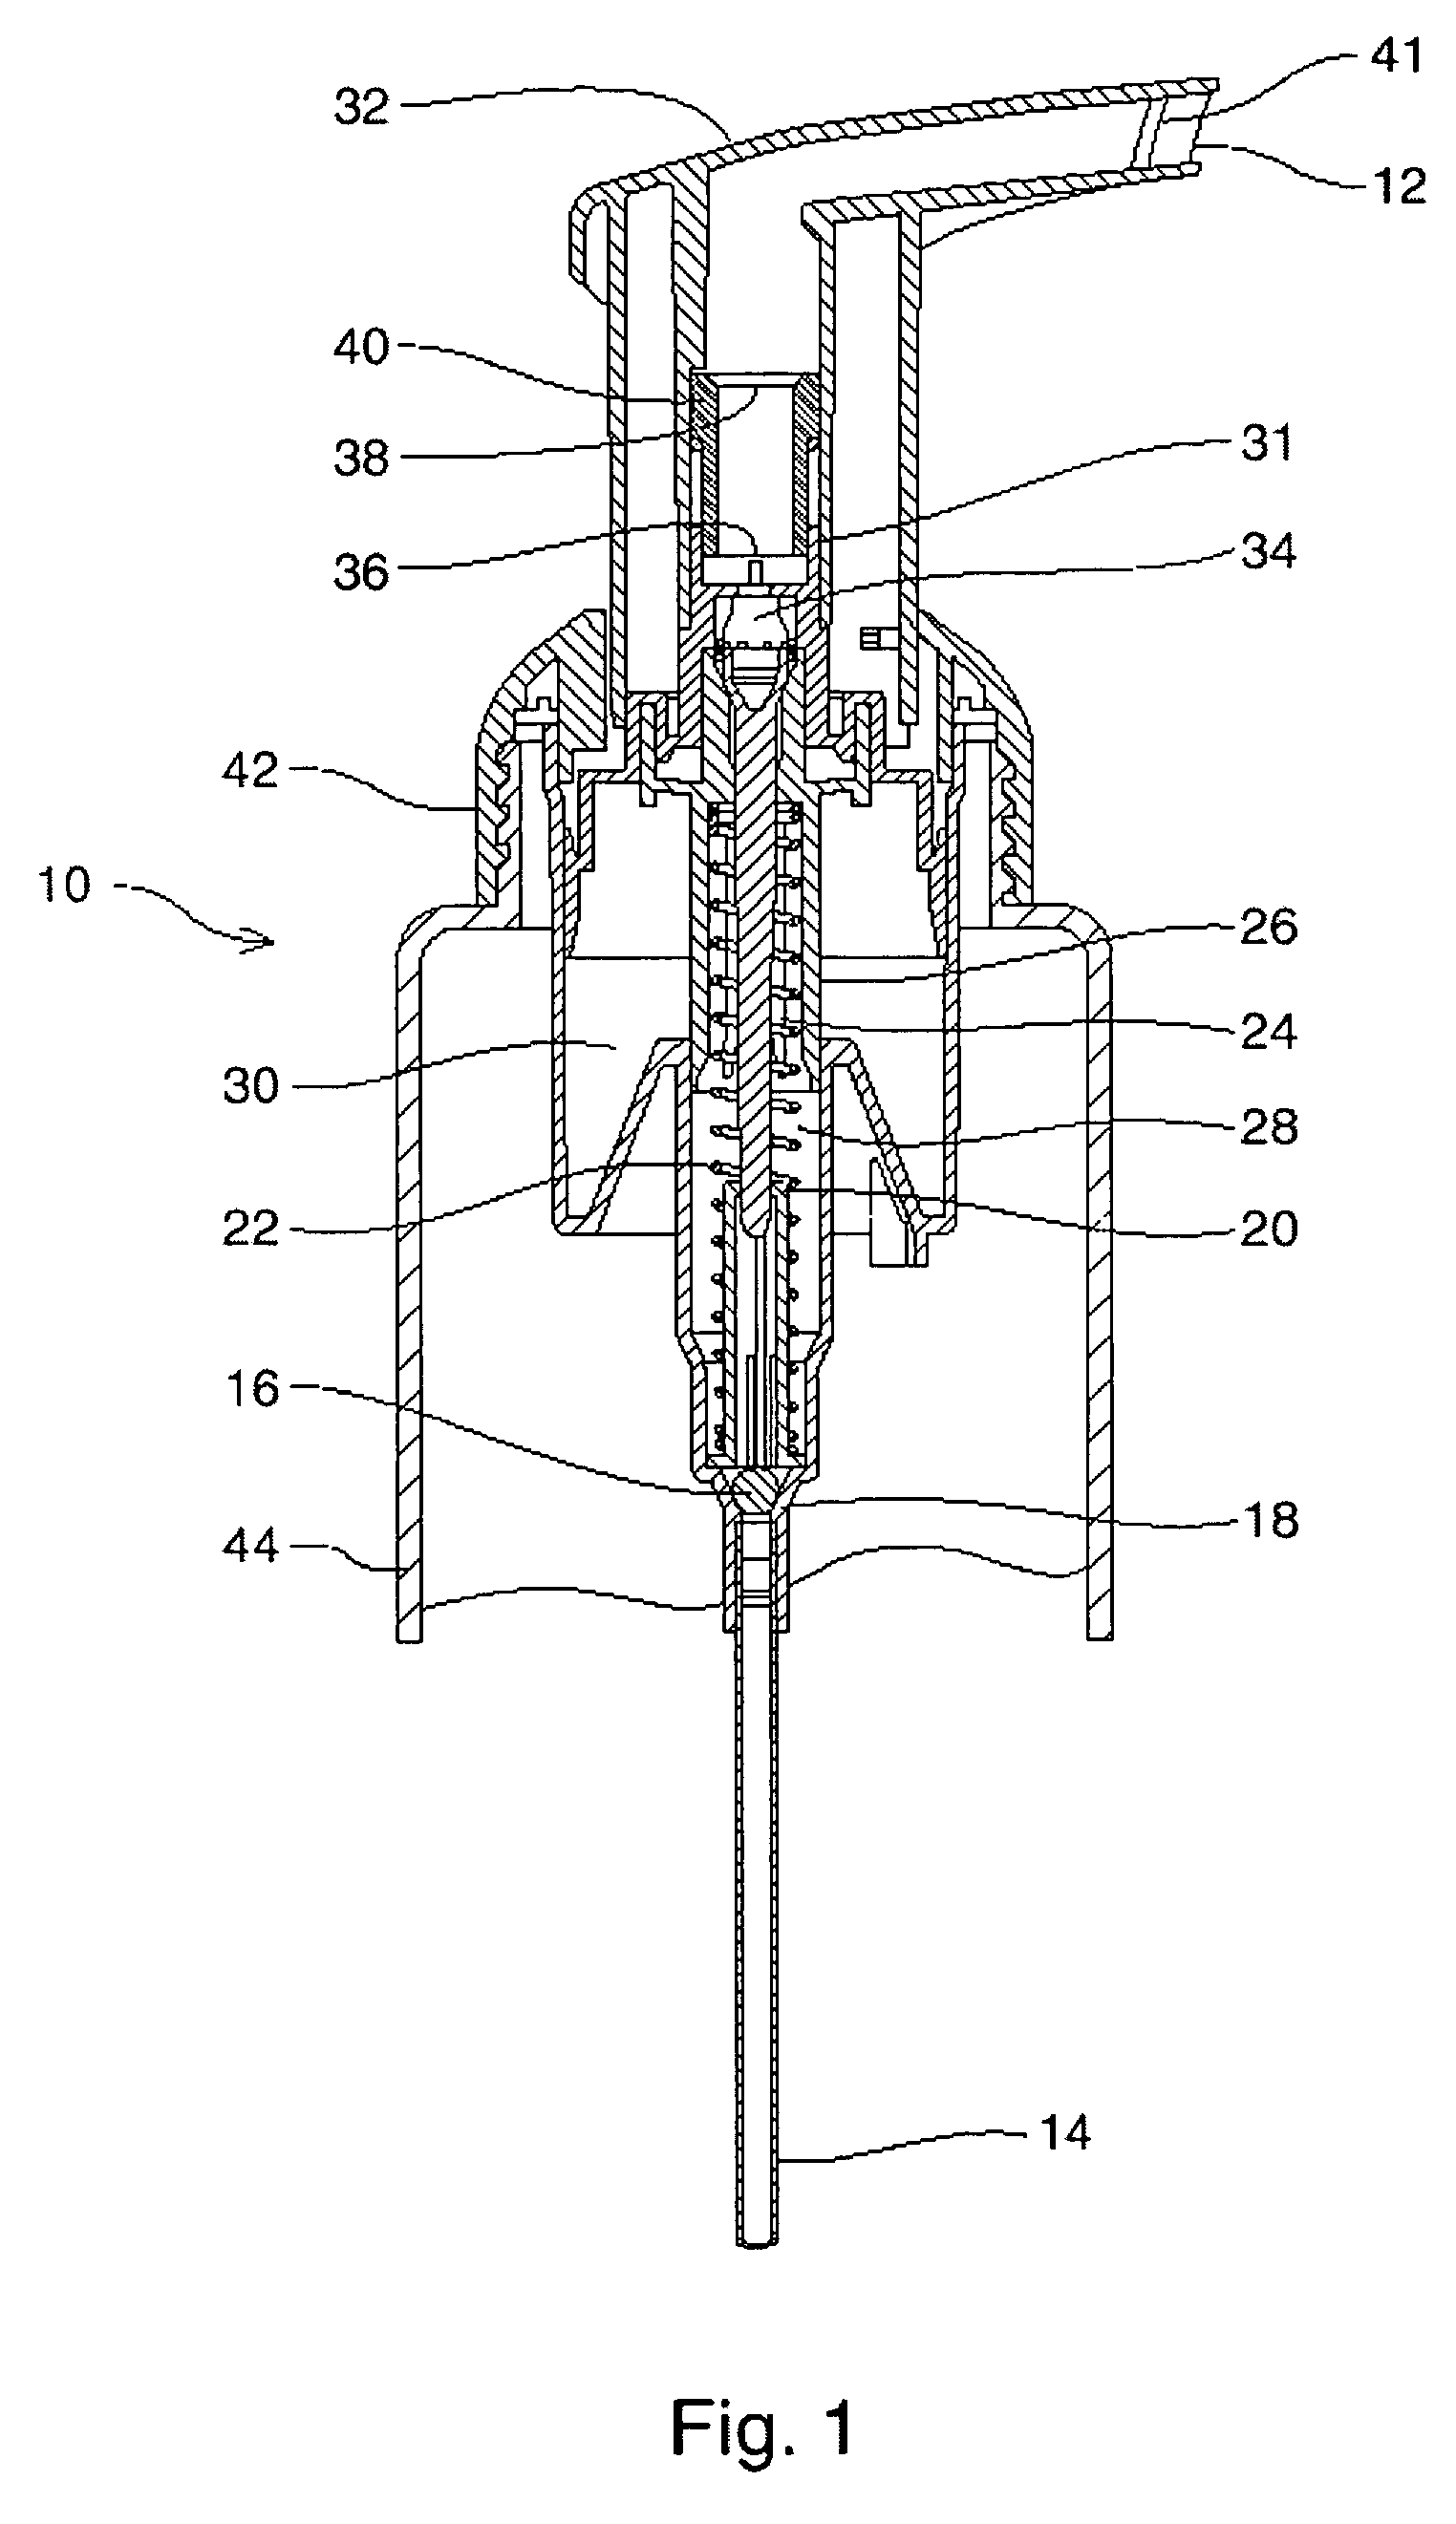 Foam-generating kit containing a foam-generating dispenser and a composition containing a high level of surfactant